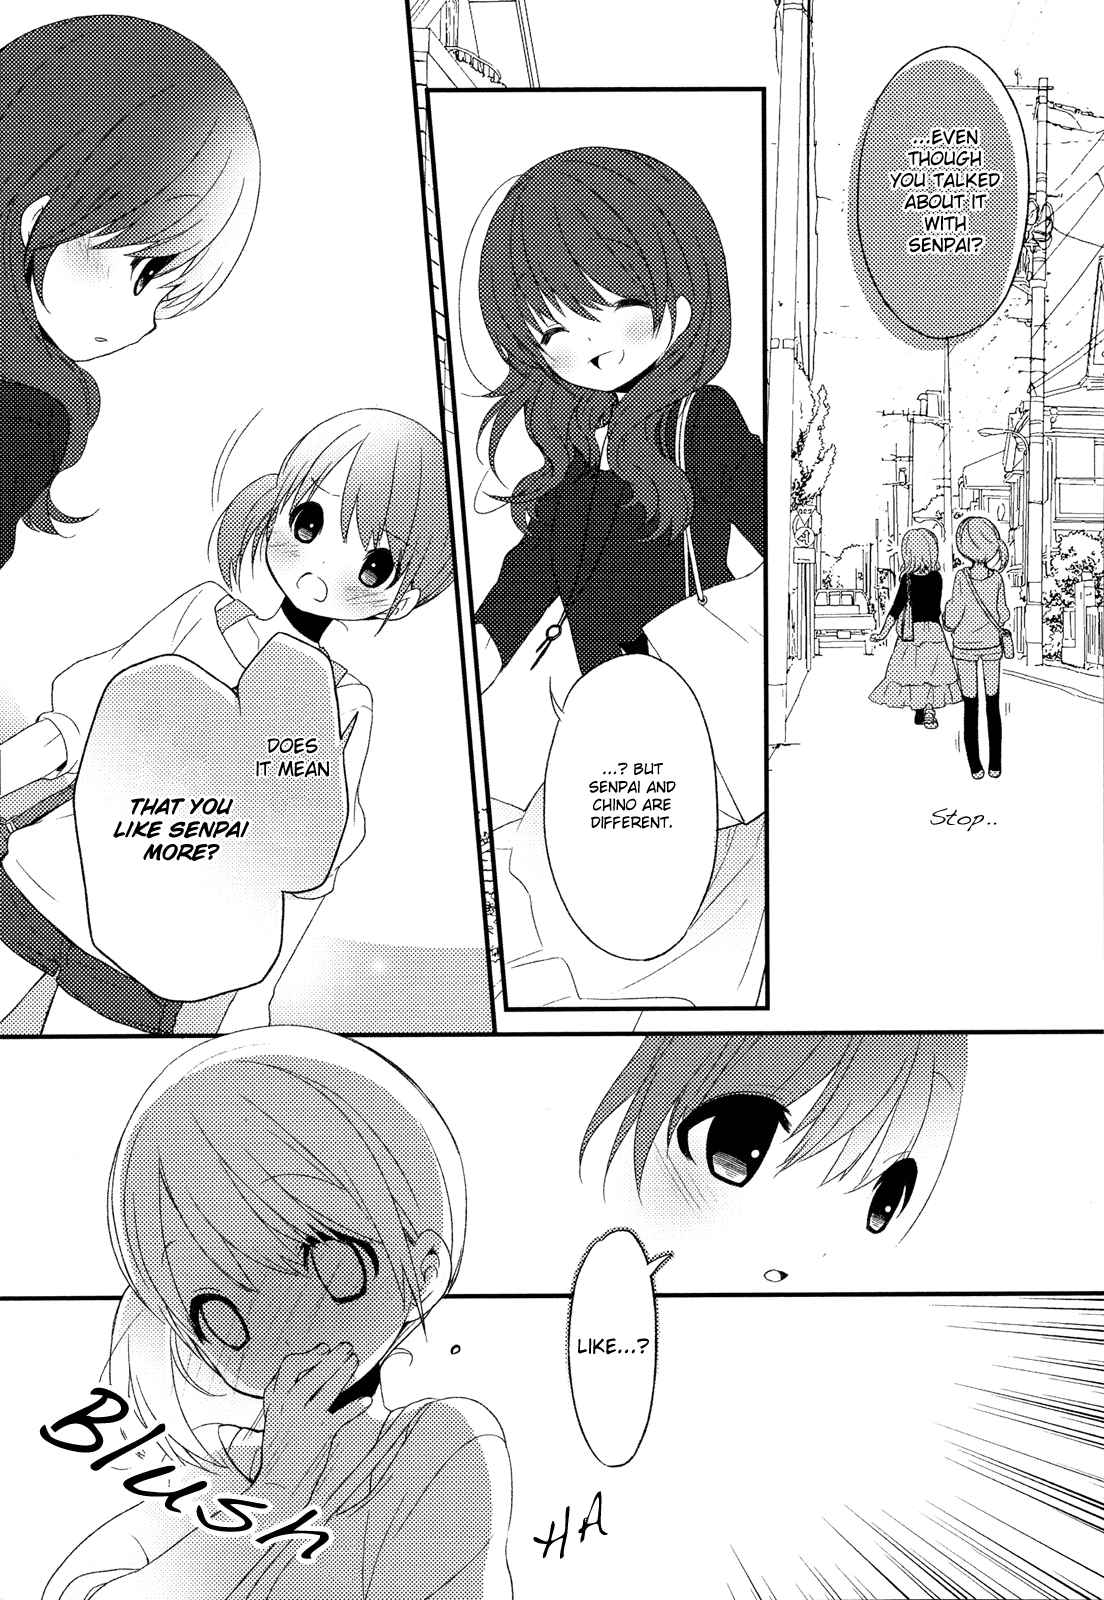 Yuri Anthology Dolce (Anthology) Vol. 1 Ch. 7 The Pace of Two